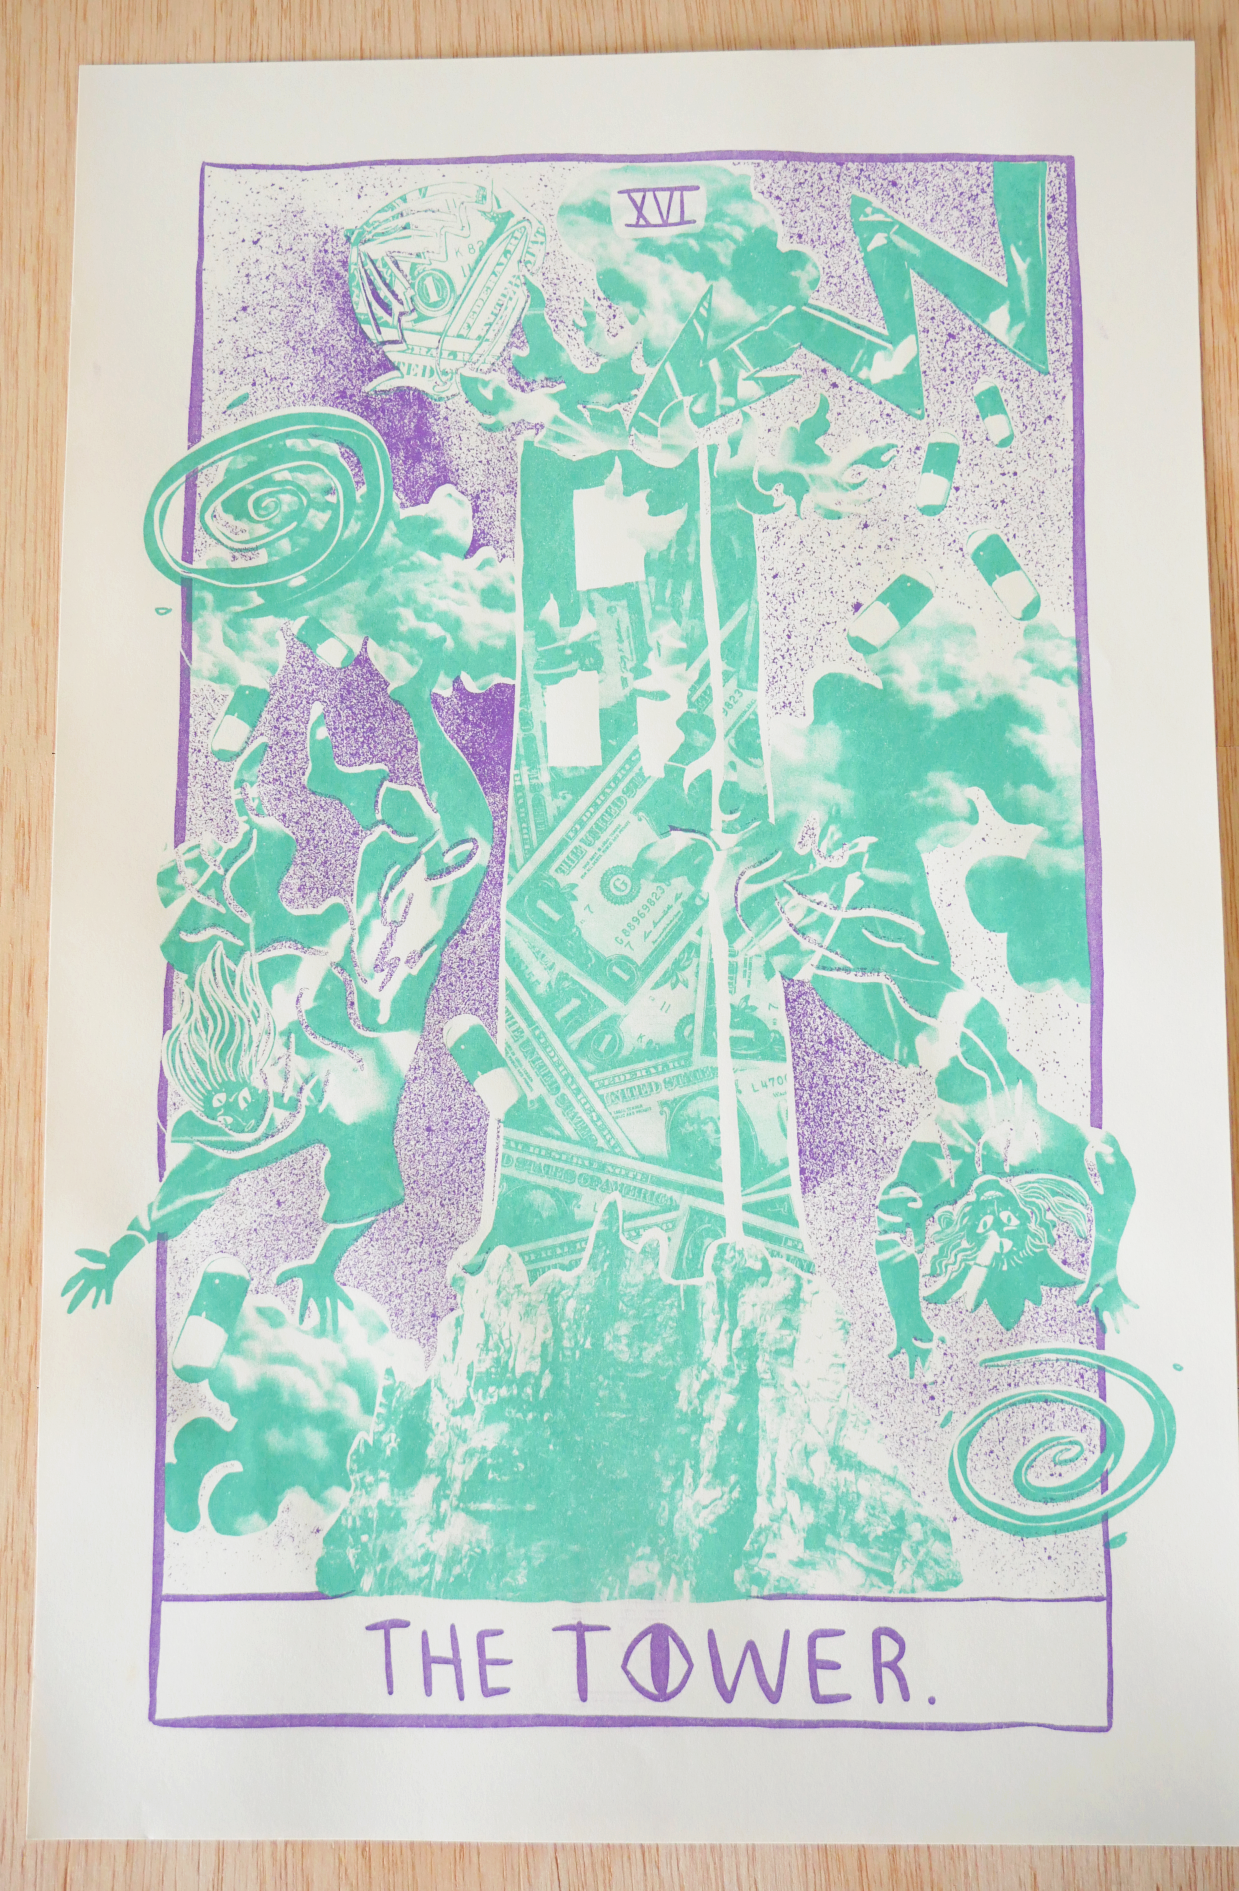 The Tower 11x17 Risograph Print